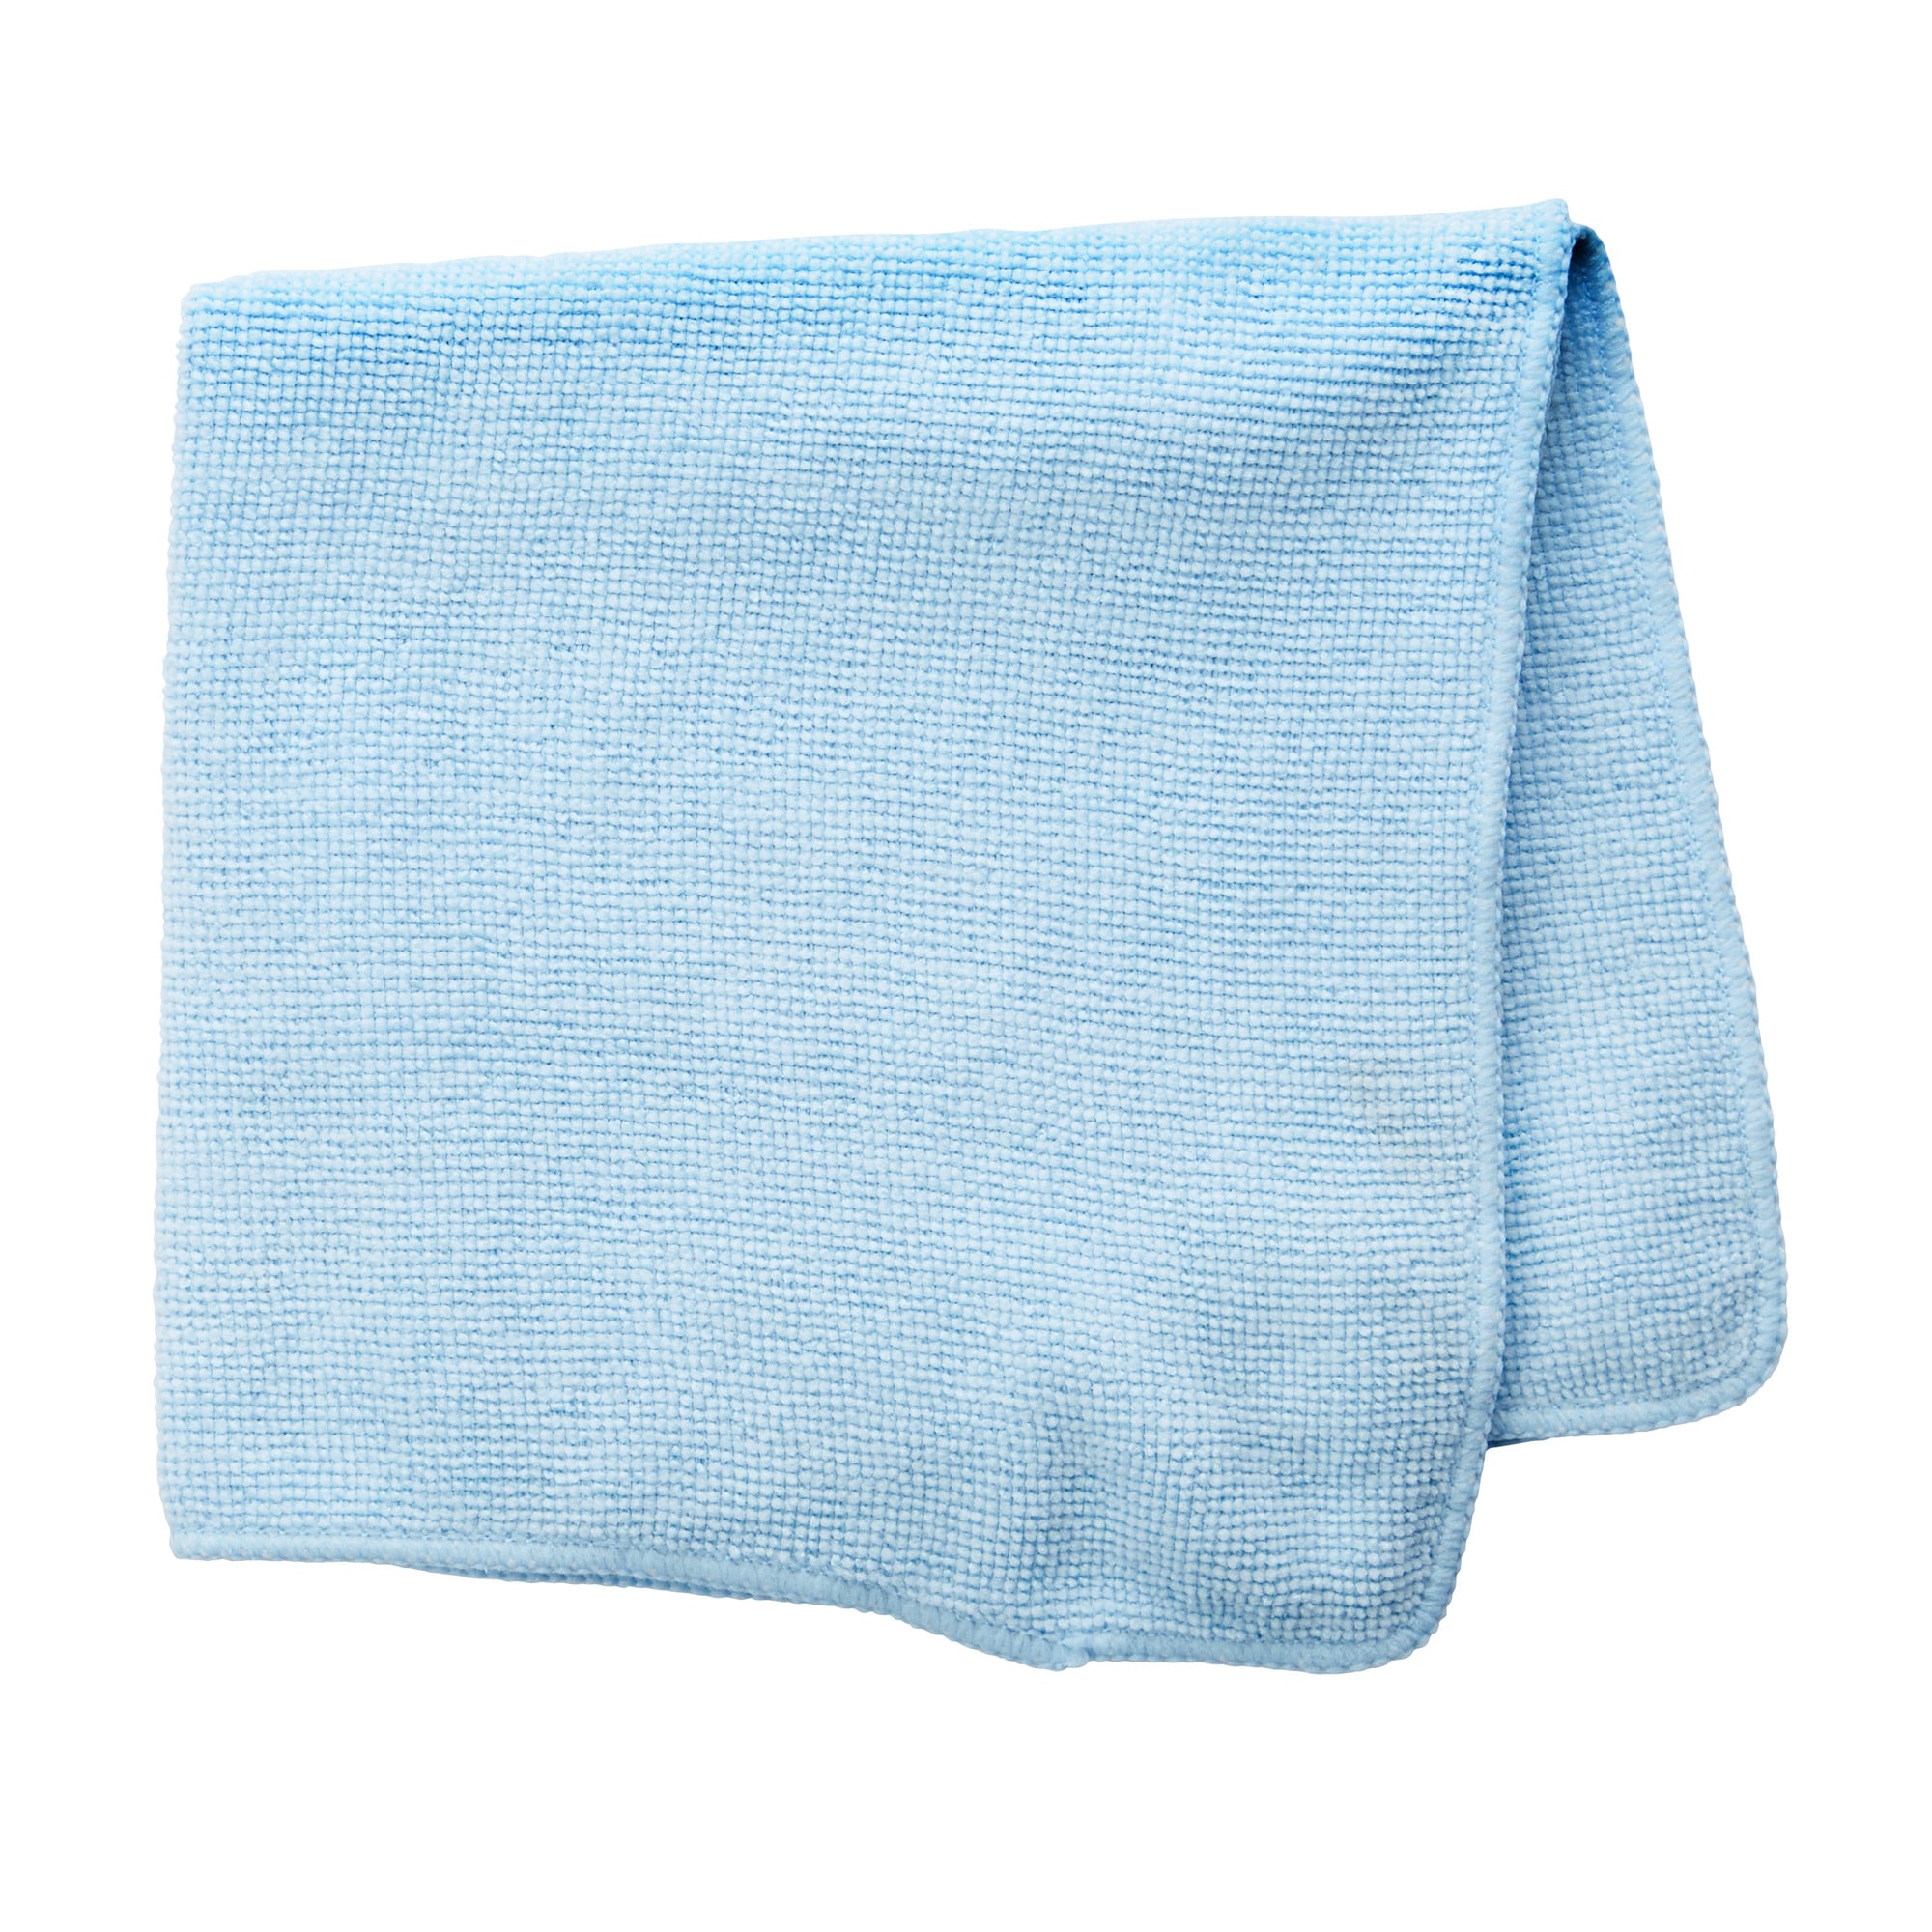 WEAWE Microfiber Towels Blue for Cars - 6 Pack (15.7 x 15.7 inch), Micro  Fiber Cleaning Cloth for Car Washing Drying & Auto Detailing, Strong Water